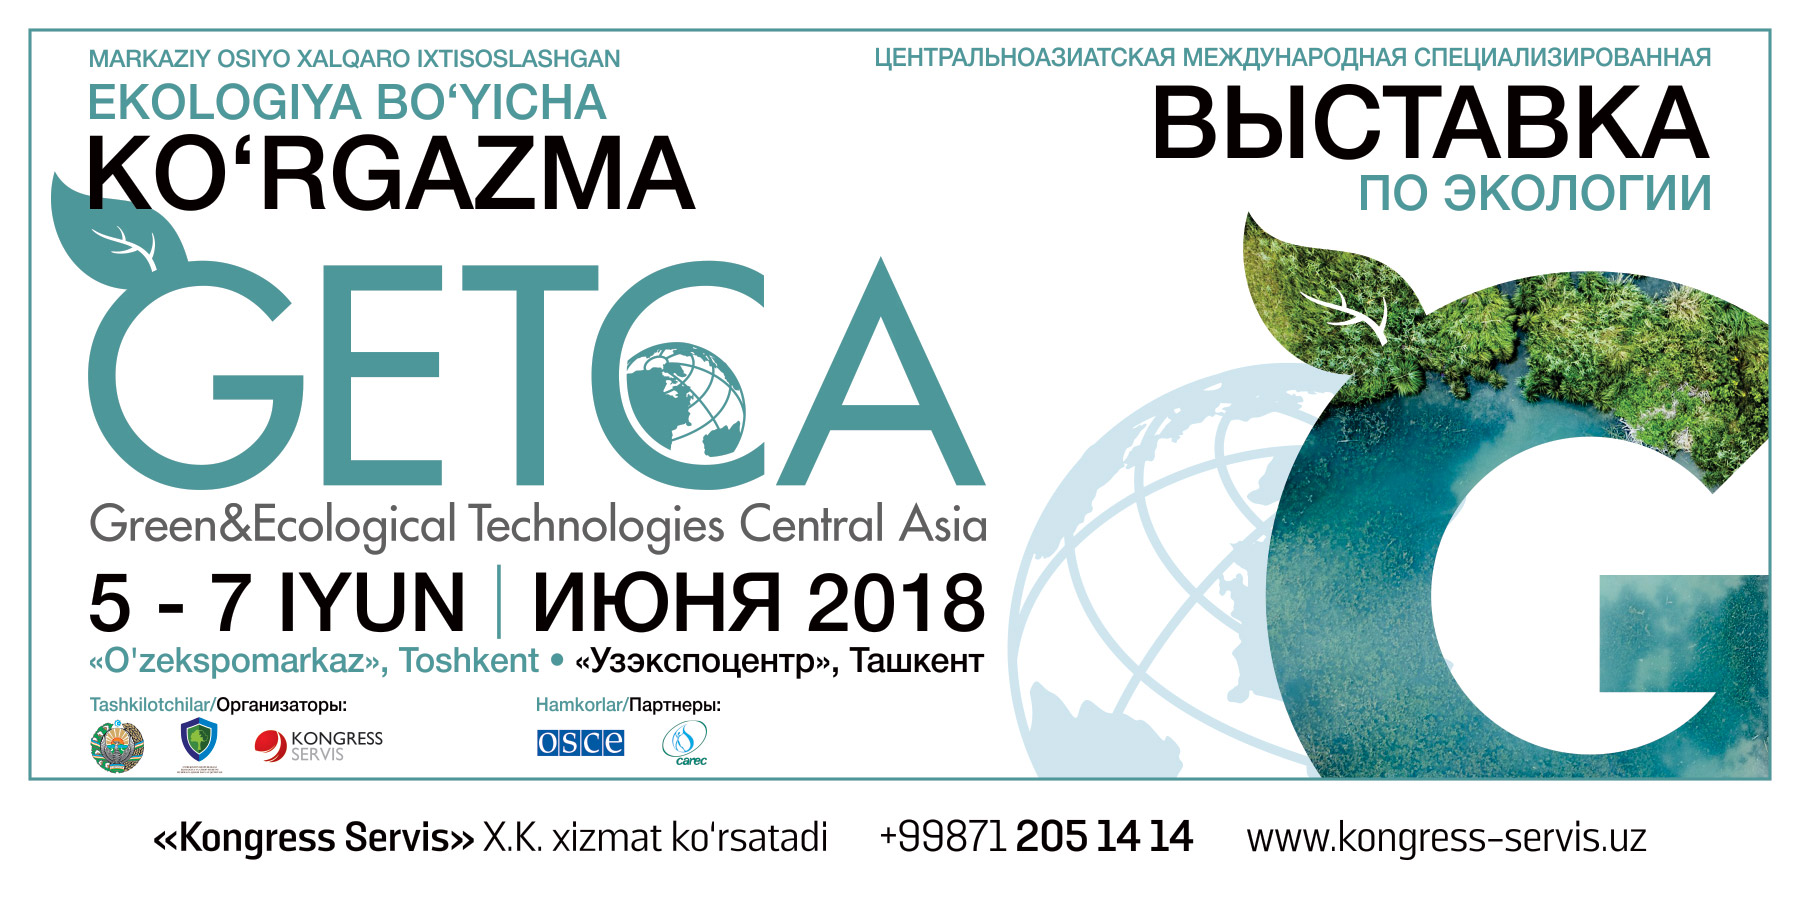 The first specialized exhibition on green technologies will be held in Tashkent within CAIEF 2018